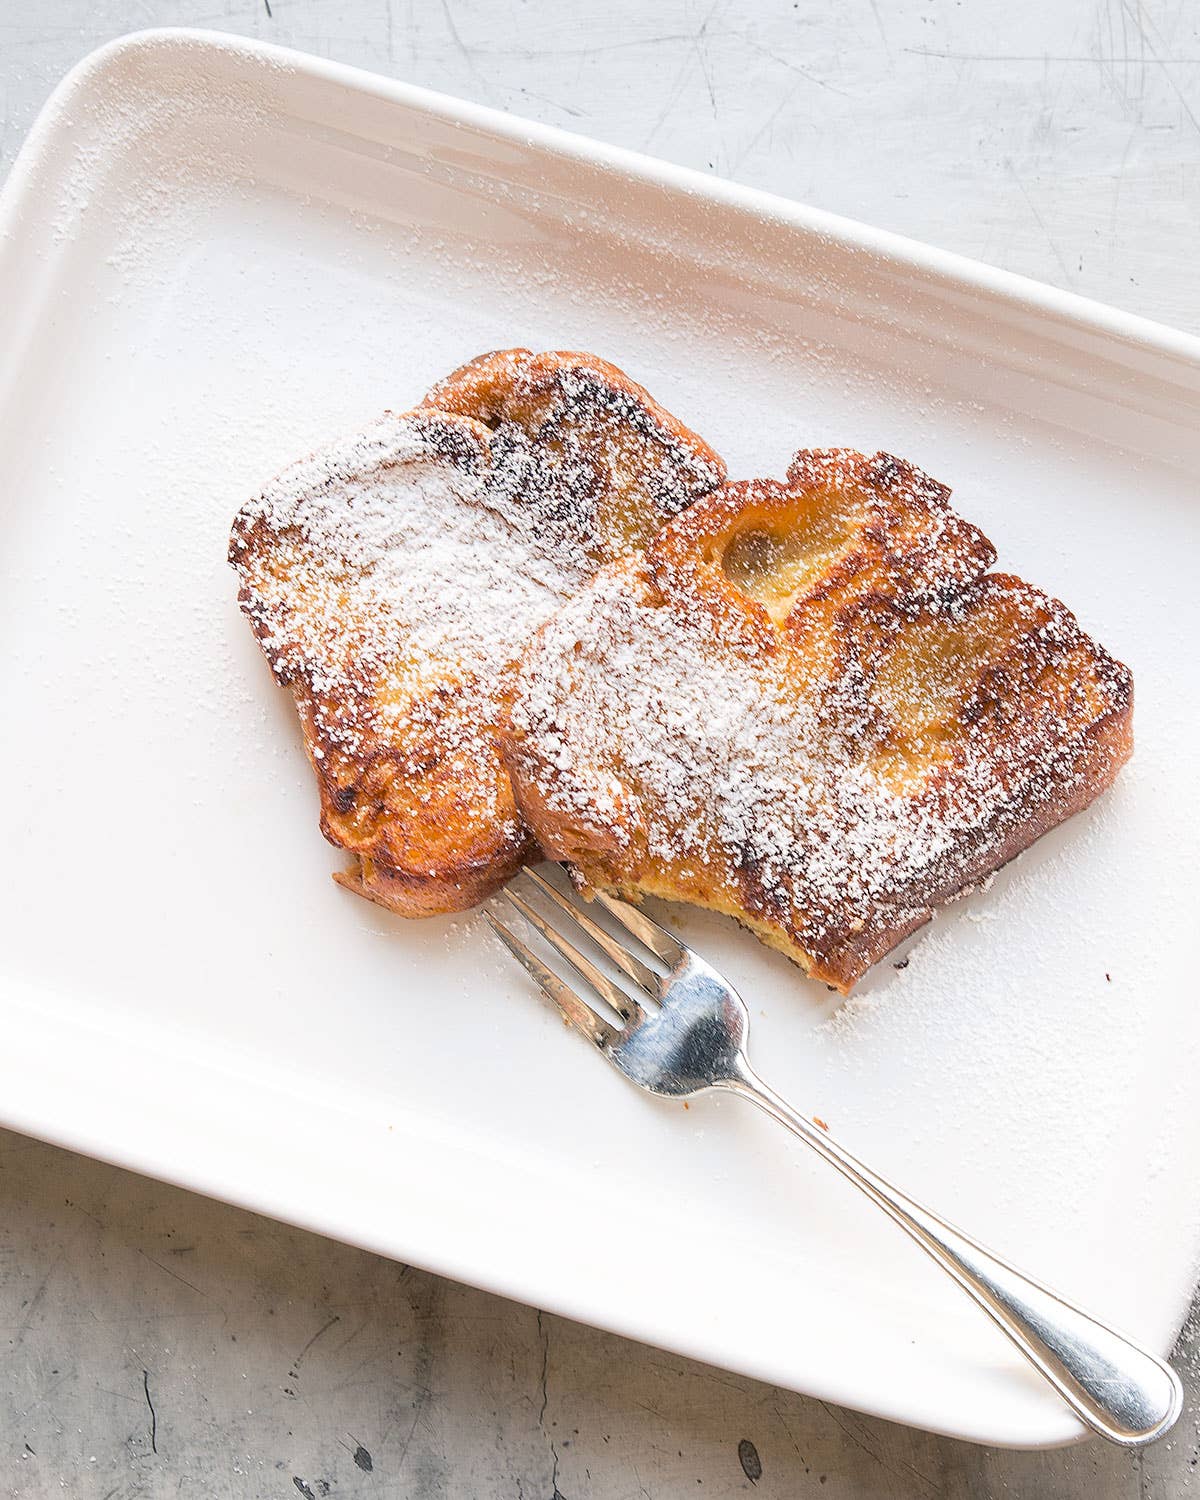 Make French Toast, New Orleans-Style